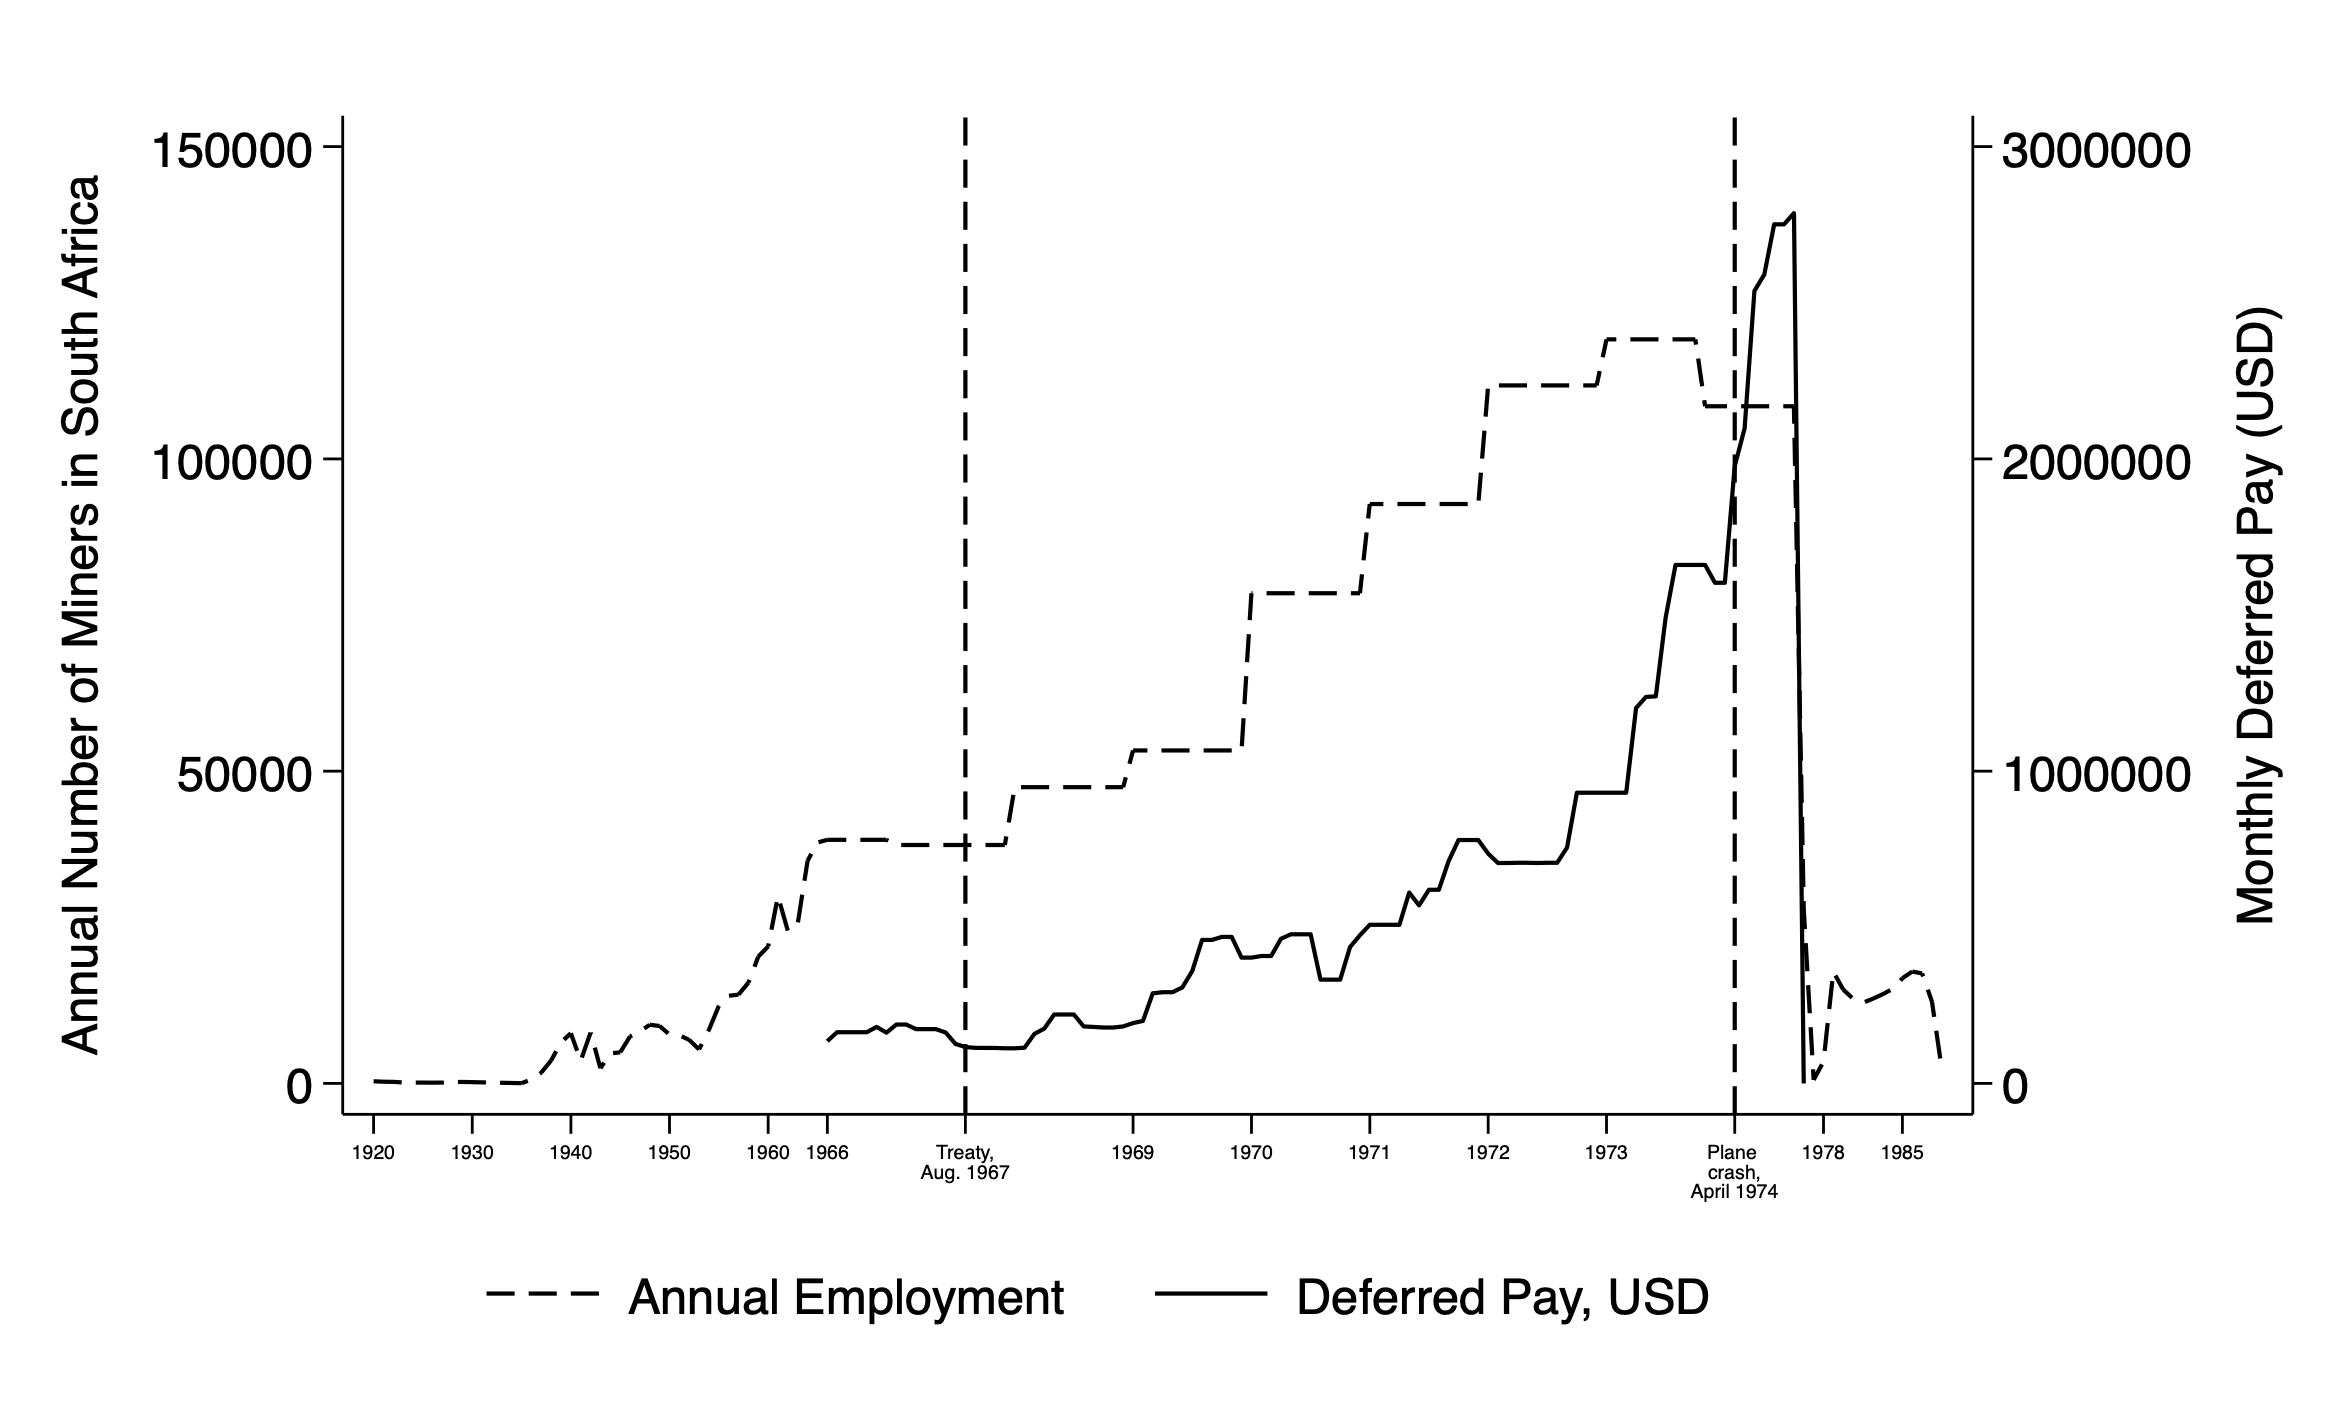 Surge and decline of migrant workers and capital flows over time